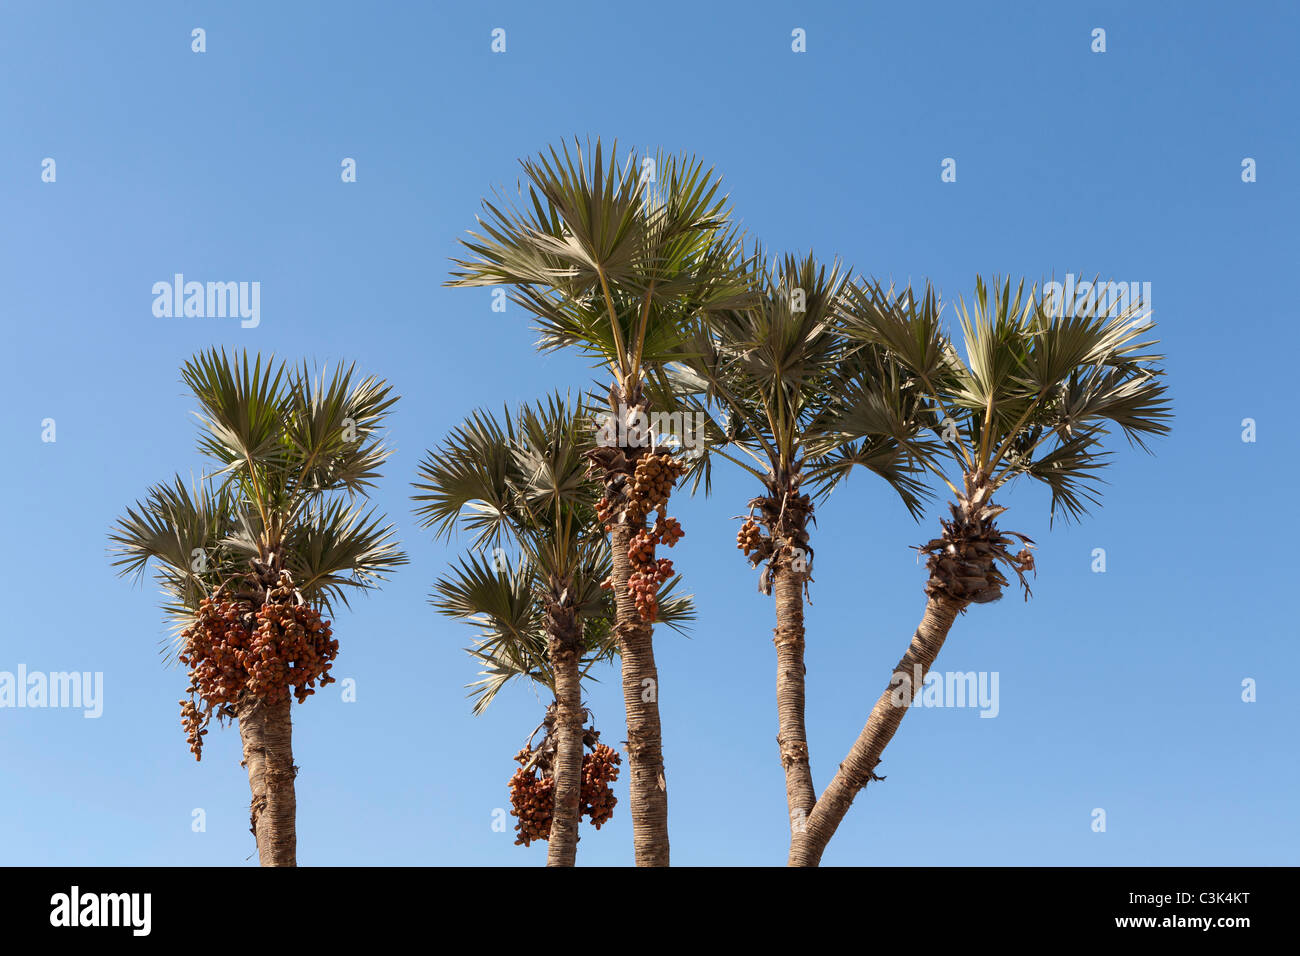 Five date palms against a bright blue sky, Egypt, Africa Stock Photo